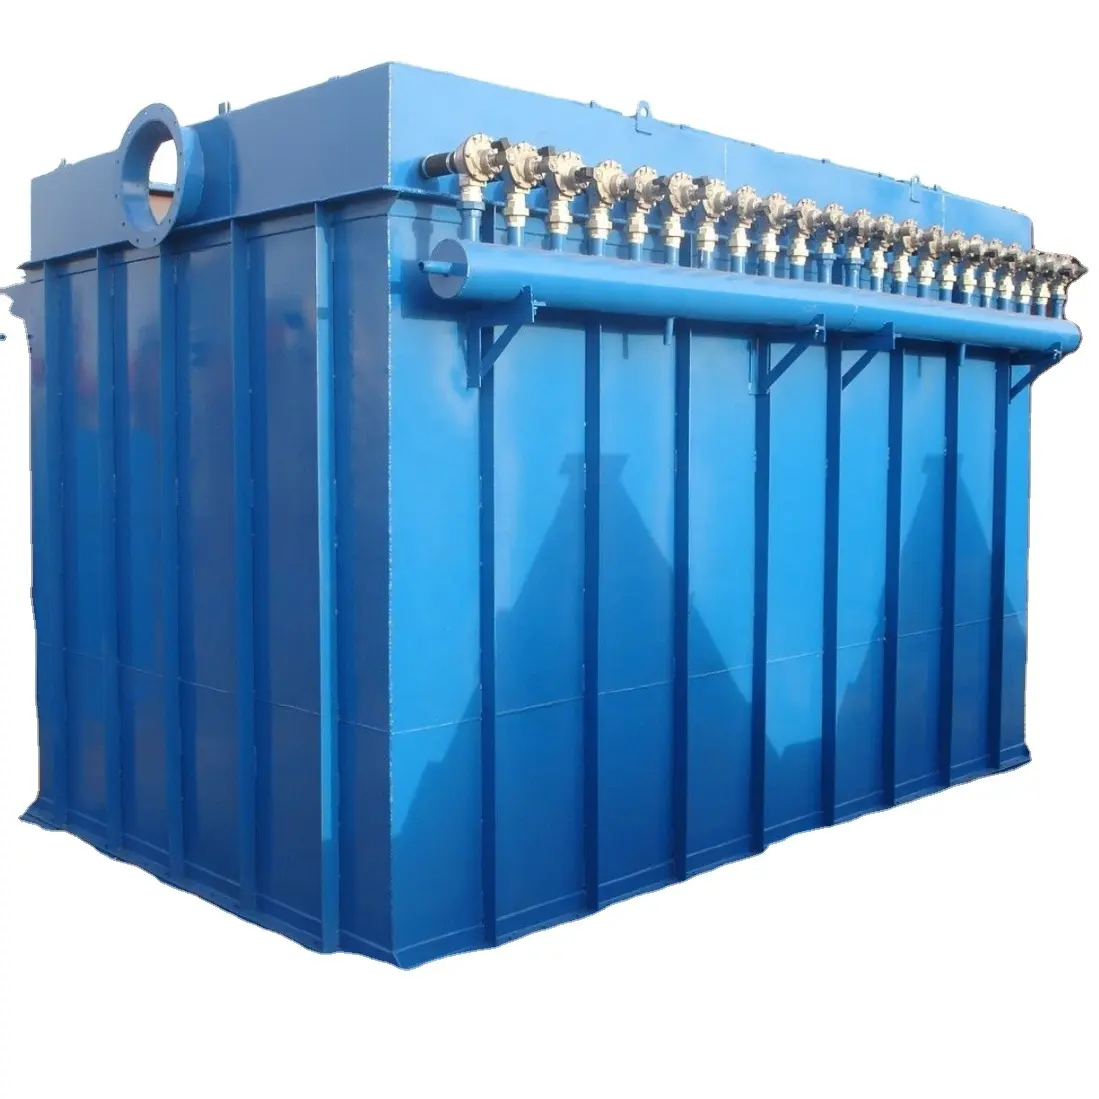 New ESP Pulse Dust Collector for Boiler   Power Plant Efficient Dust Collection System with Pump Engine   Motor Core Components